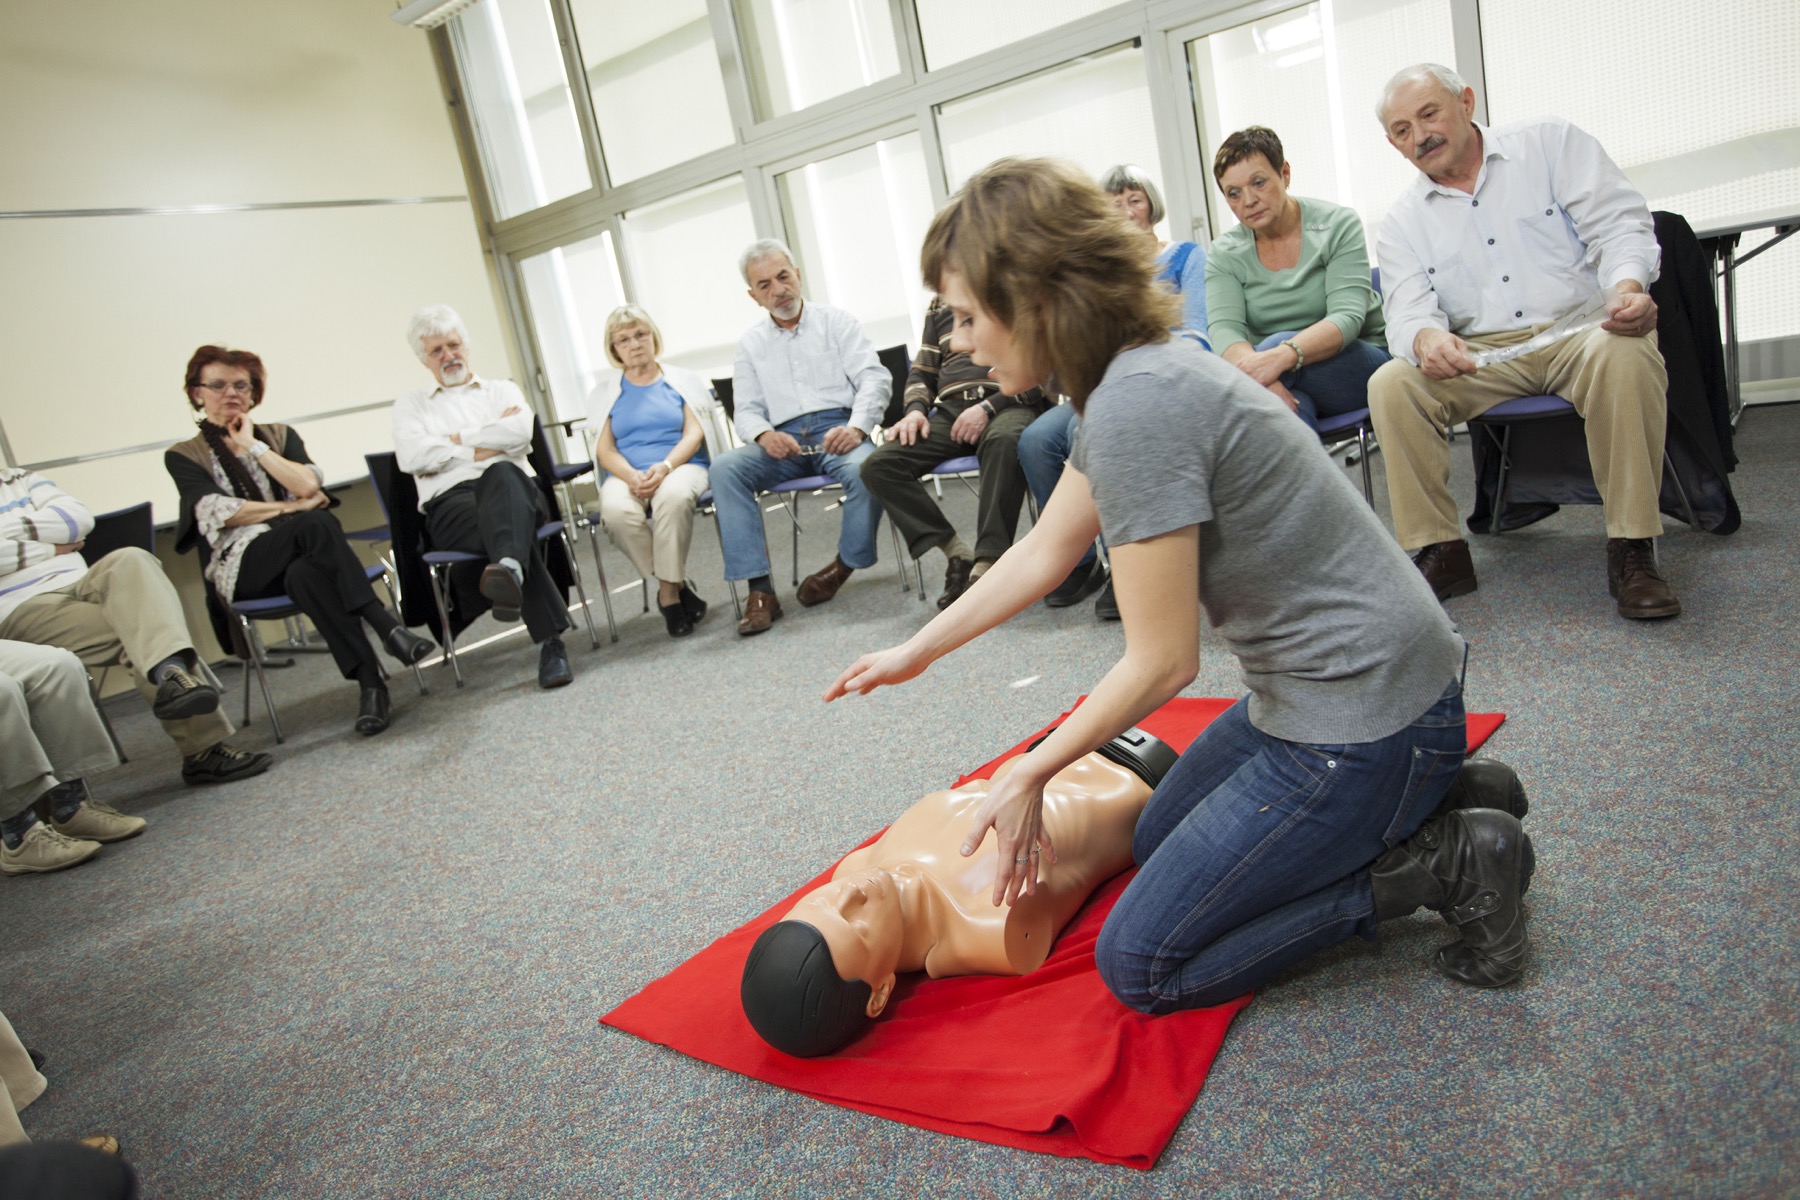 CPR Classes in Houston Texas